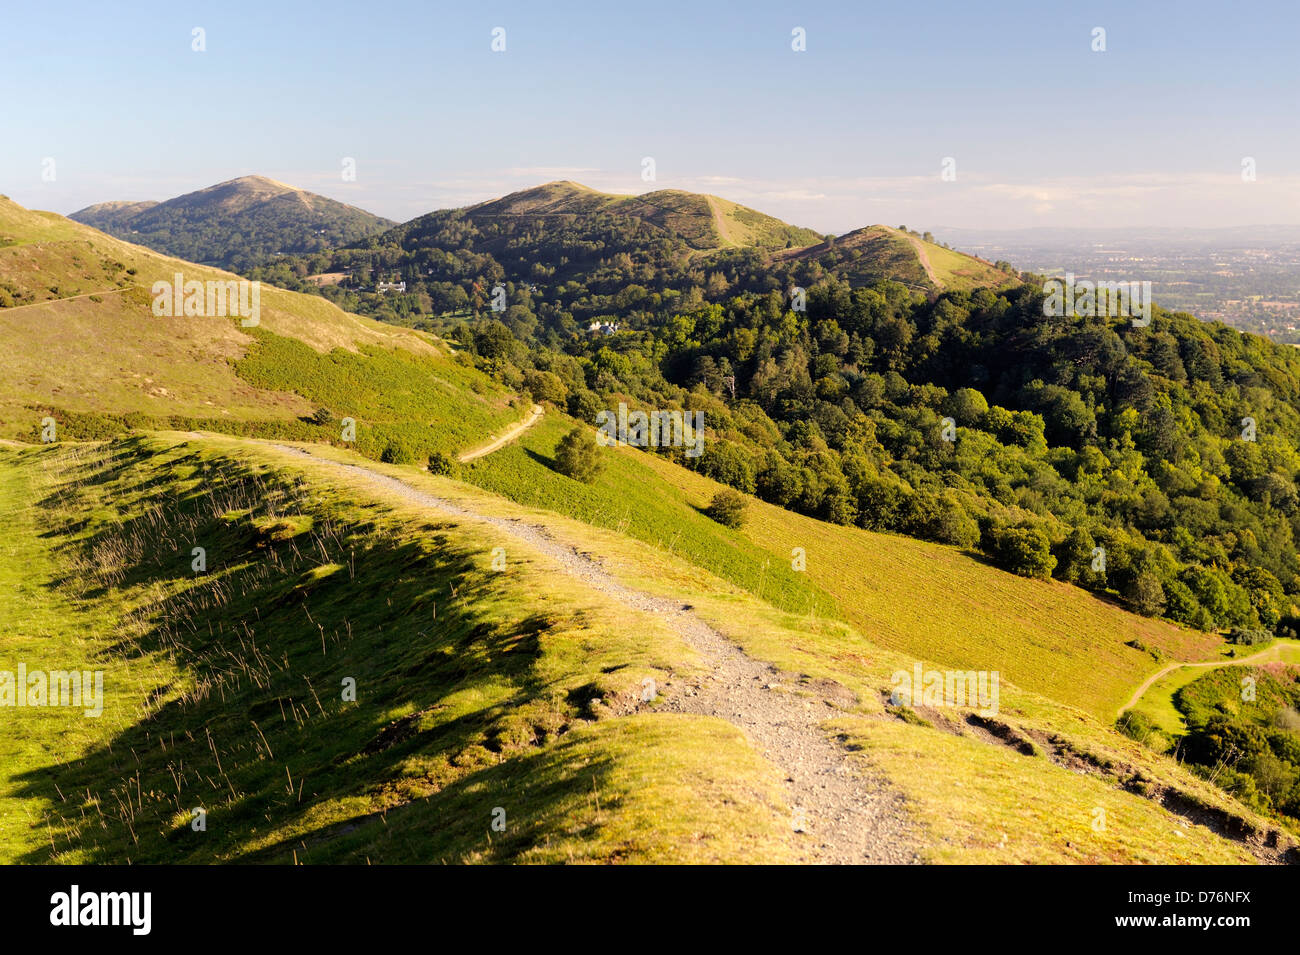 Chemin menant au nord le long de l'east flank vers Beacon Beacon Worcestershire Herefordshire. Le Malvern Hills, Herefordshire, Angleterre Banque D'Images